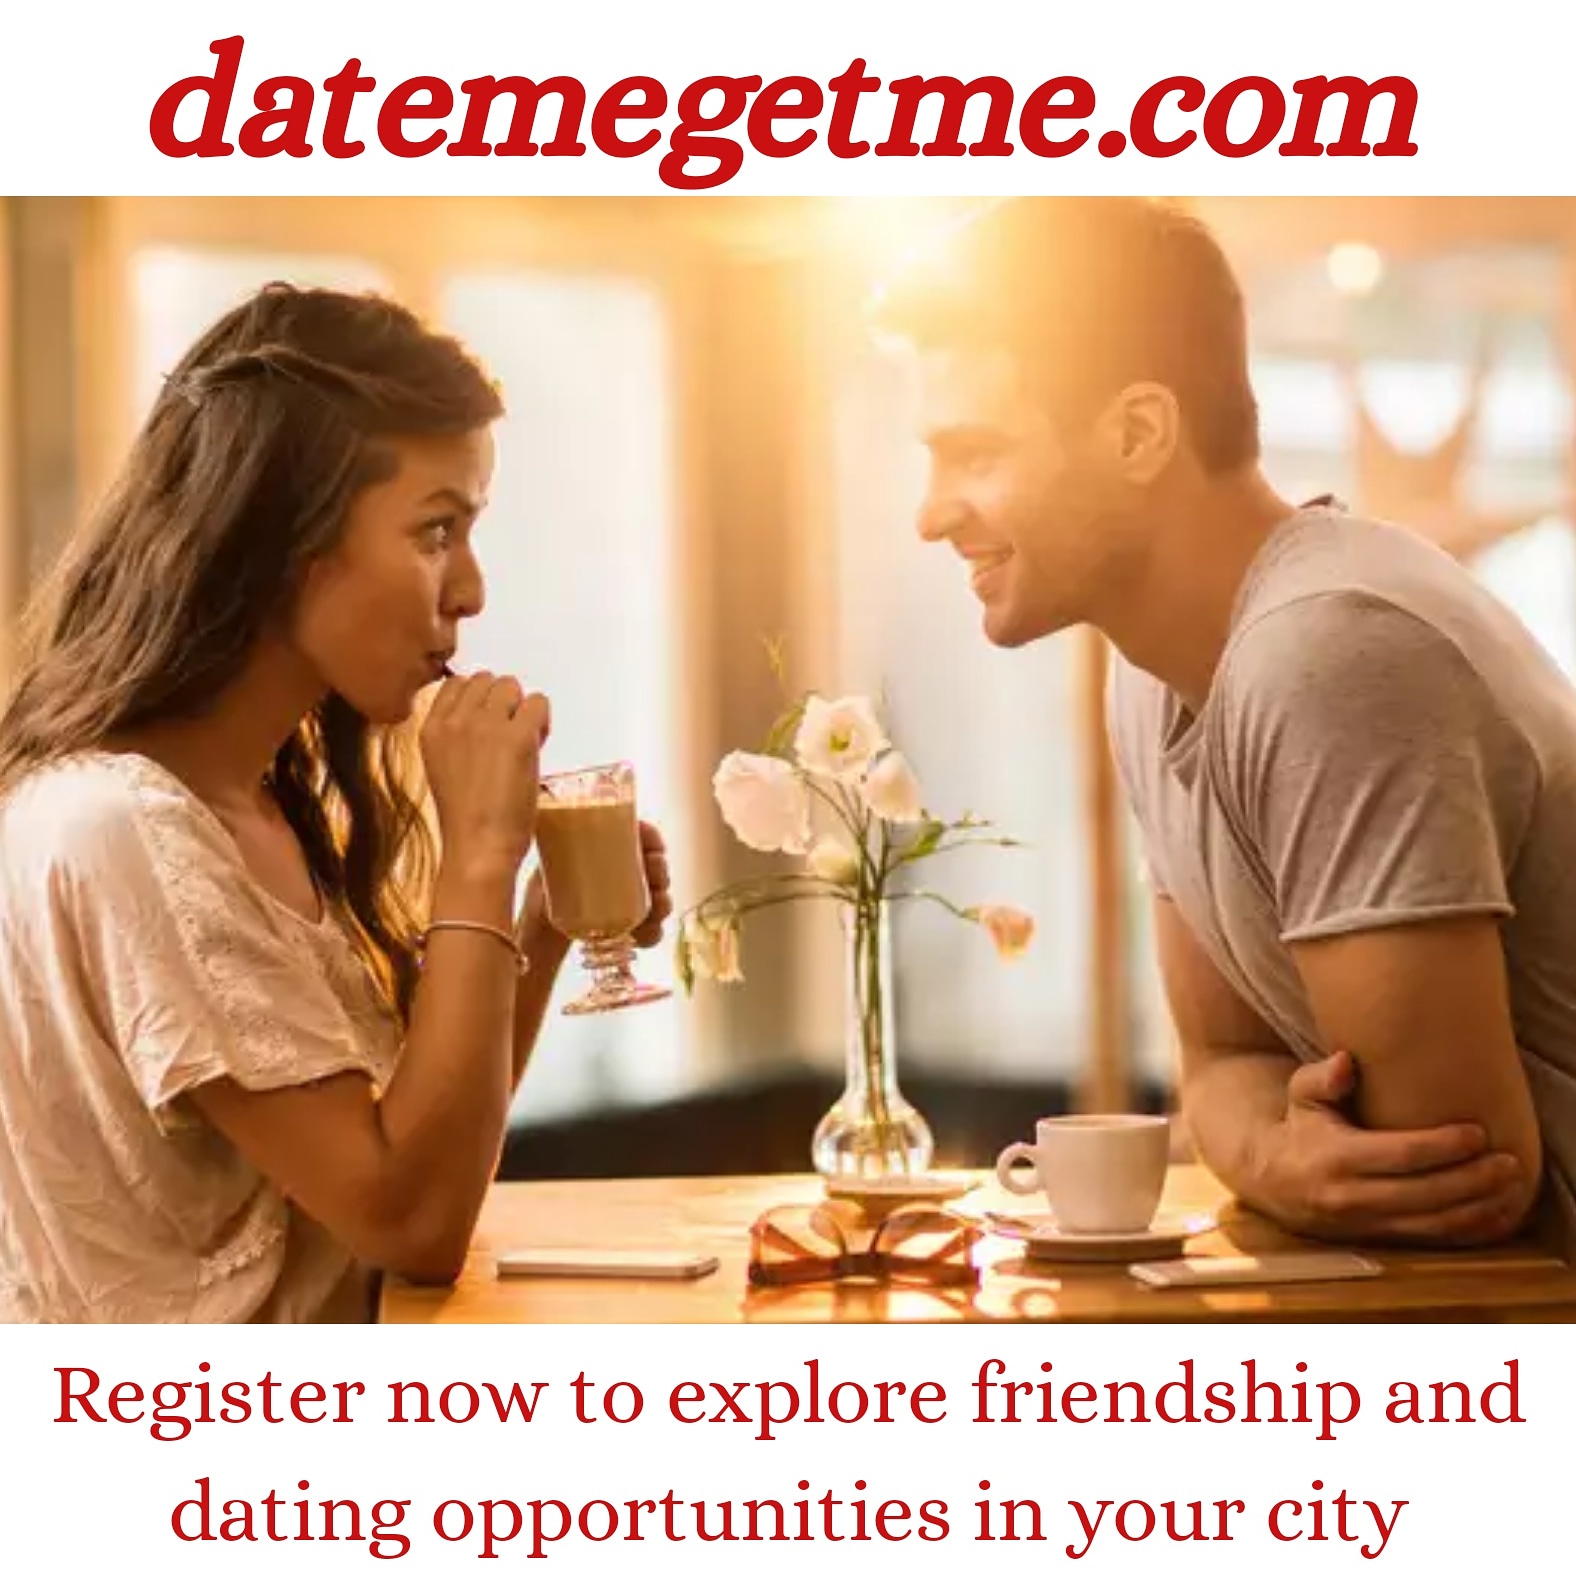 Free Online Dating - Register Now For Exploring Friendships and Dating Opportunities